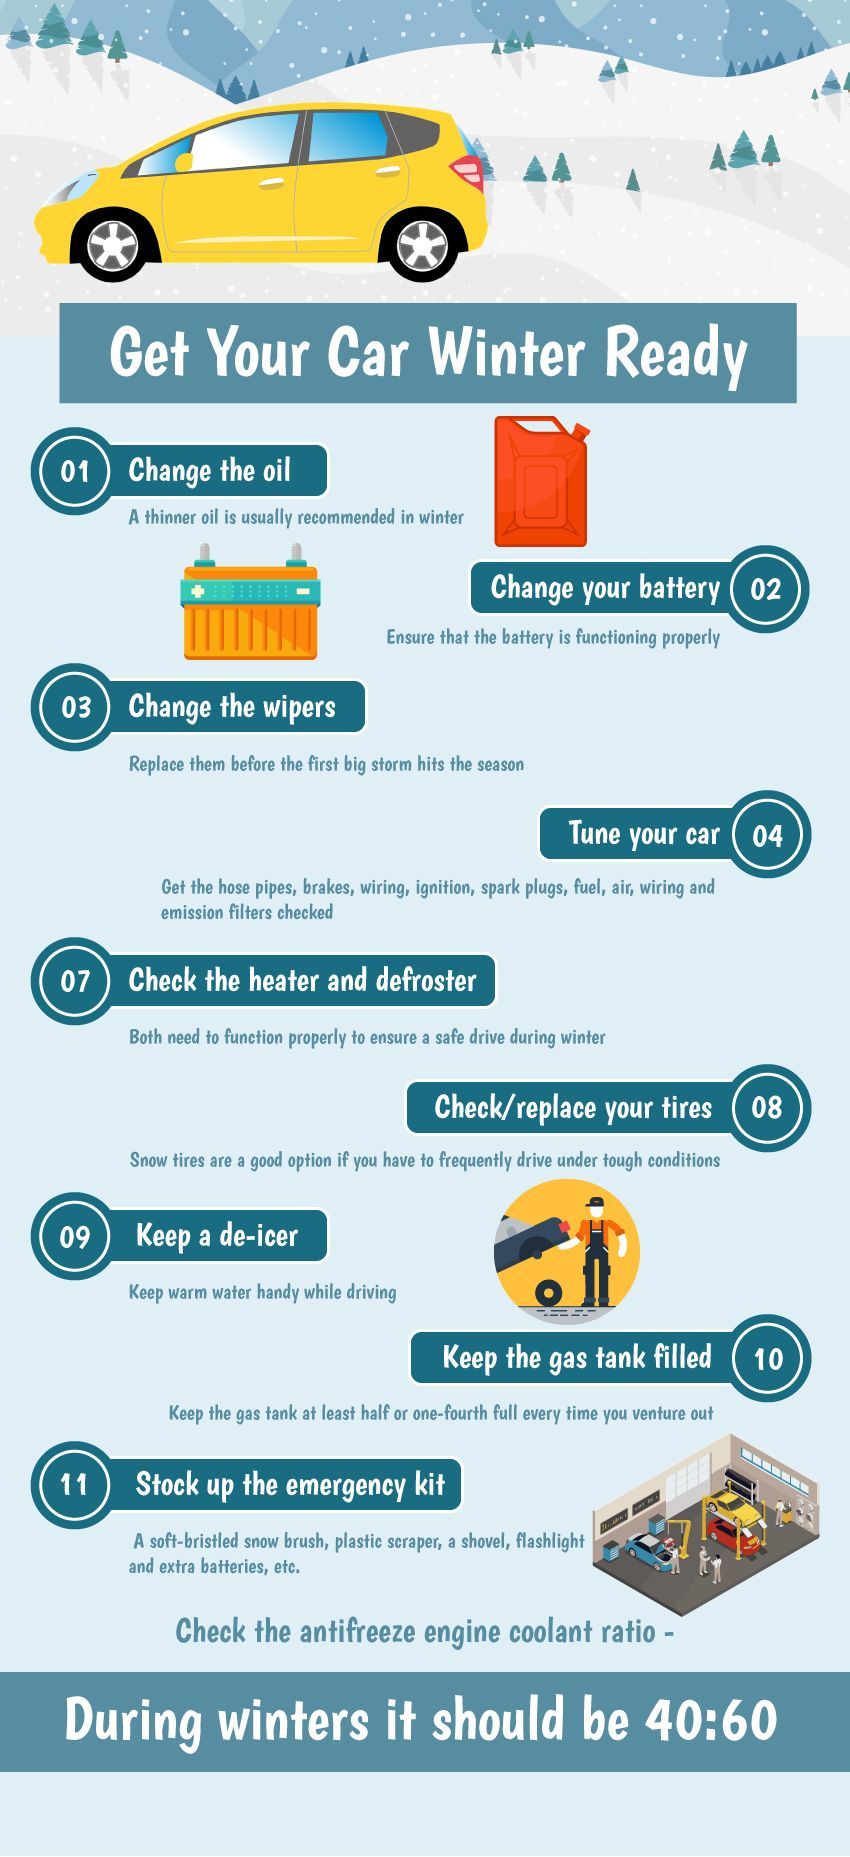 10 Tips To Get Your Car Winter Ready